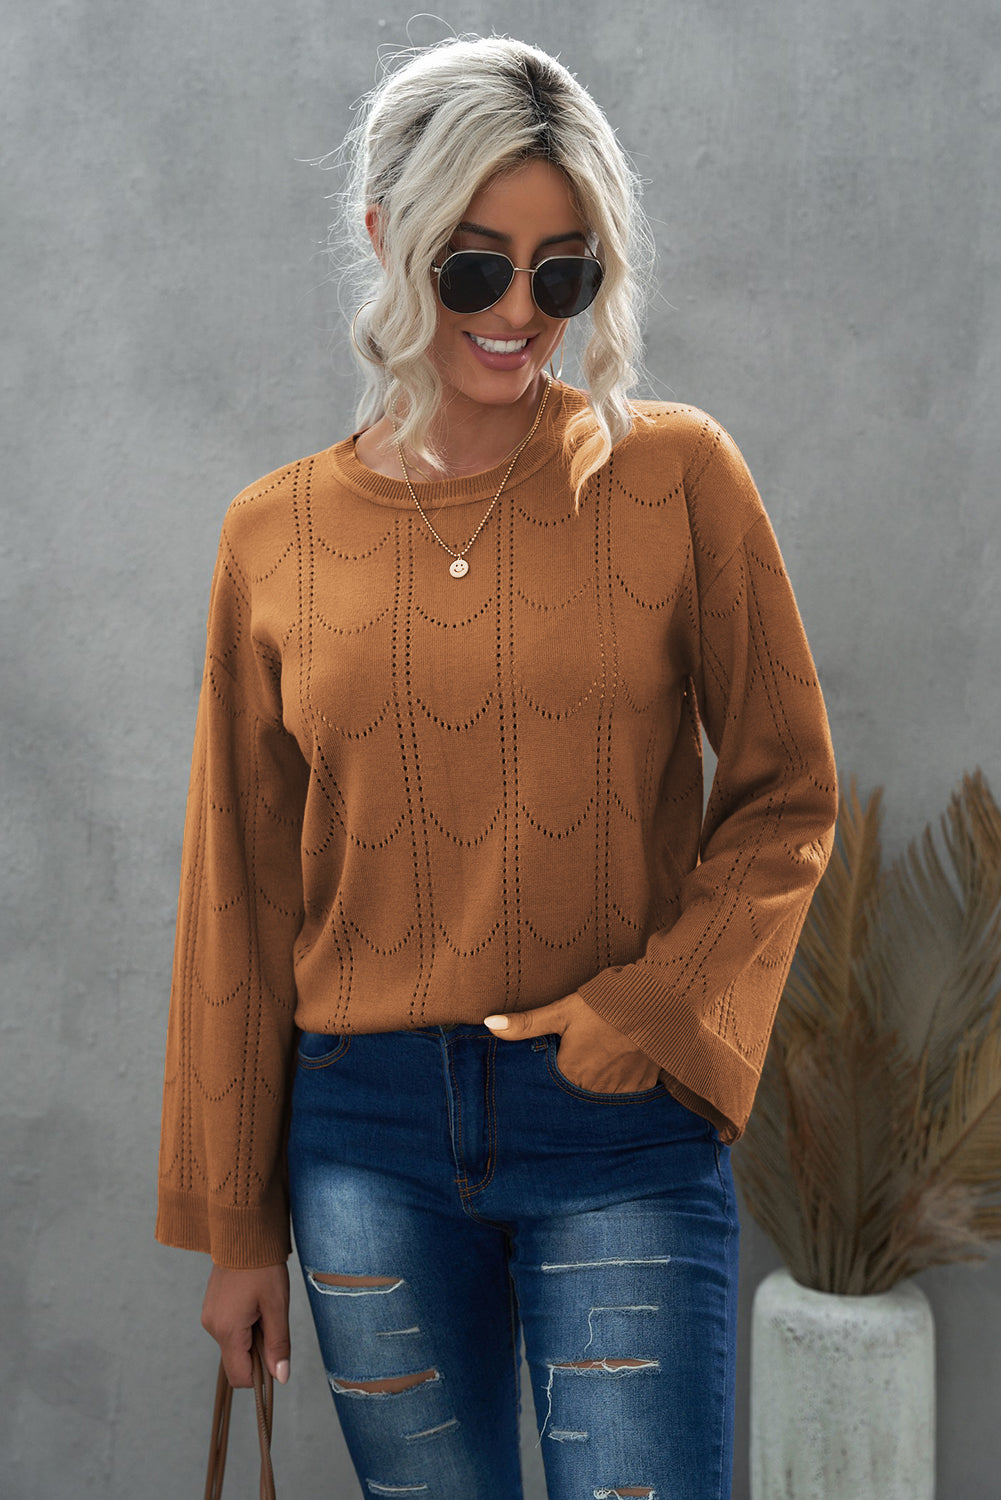 Openwork Flare Sleeve Pullover Sweater  | KIKI COUTURE-Women's Clothing, Designer Fashions, Shoes, Bags